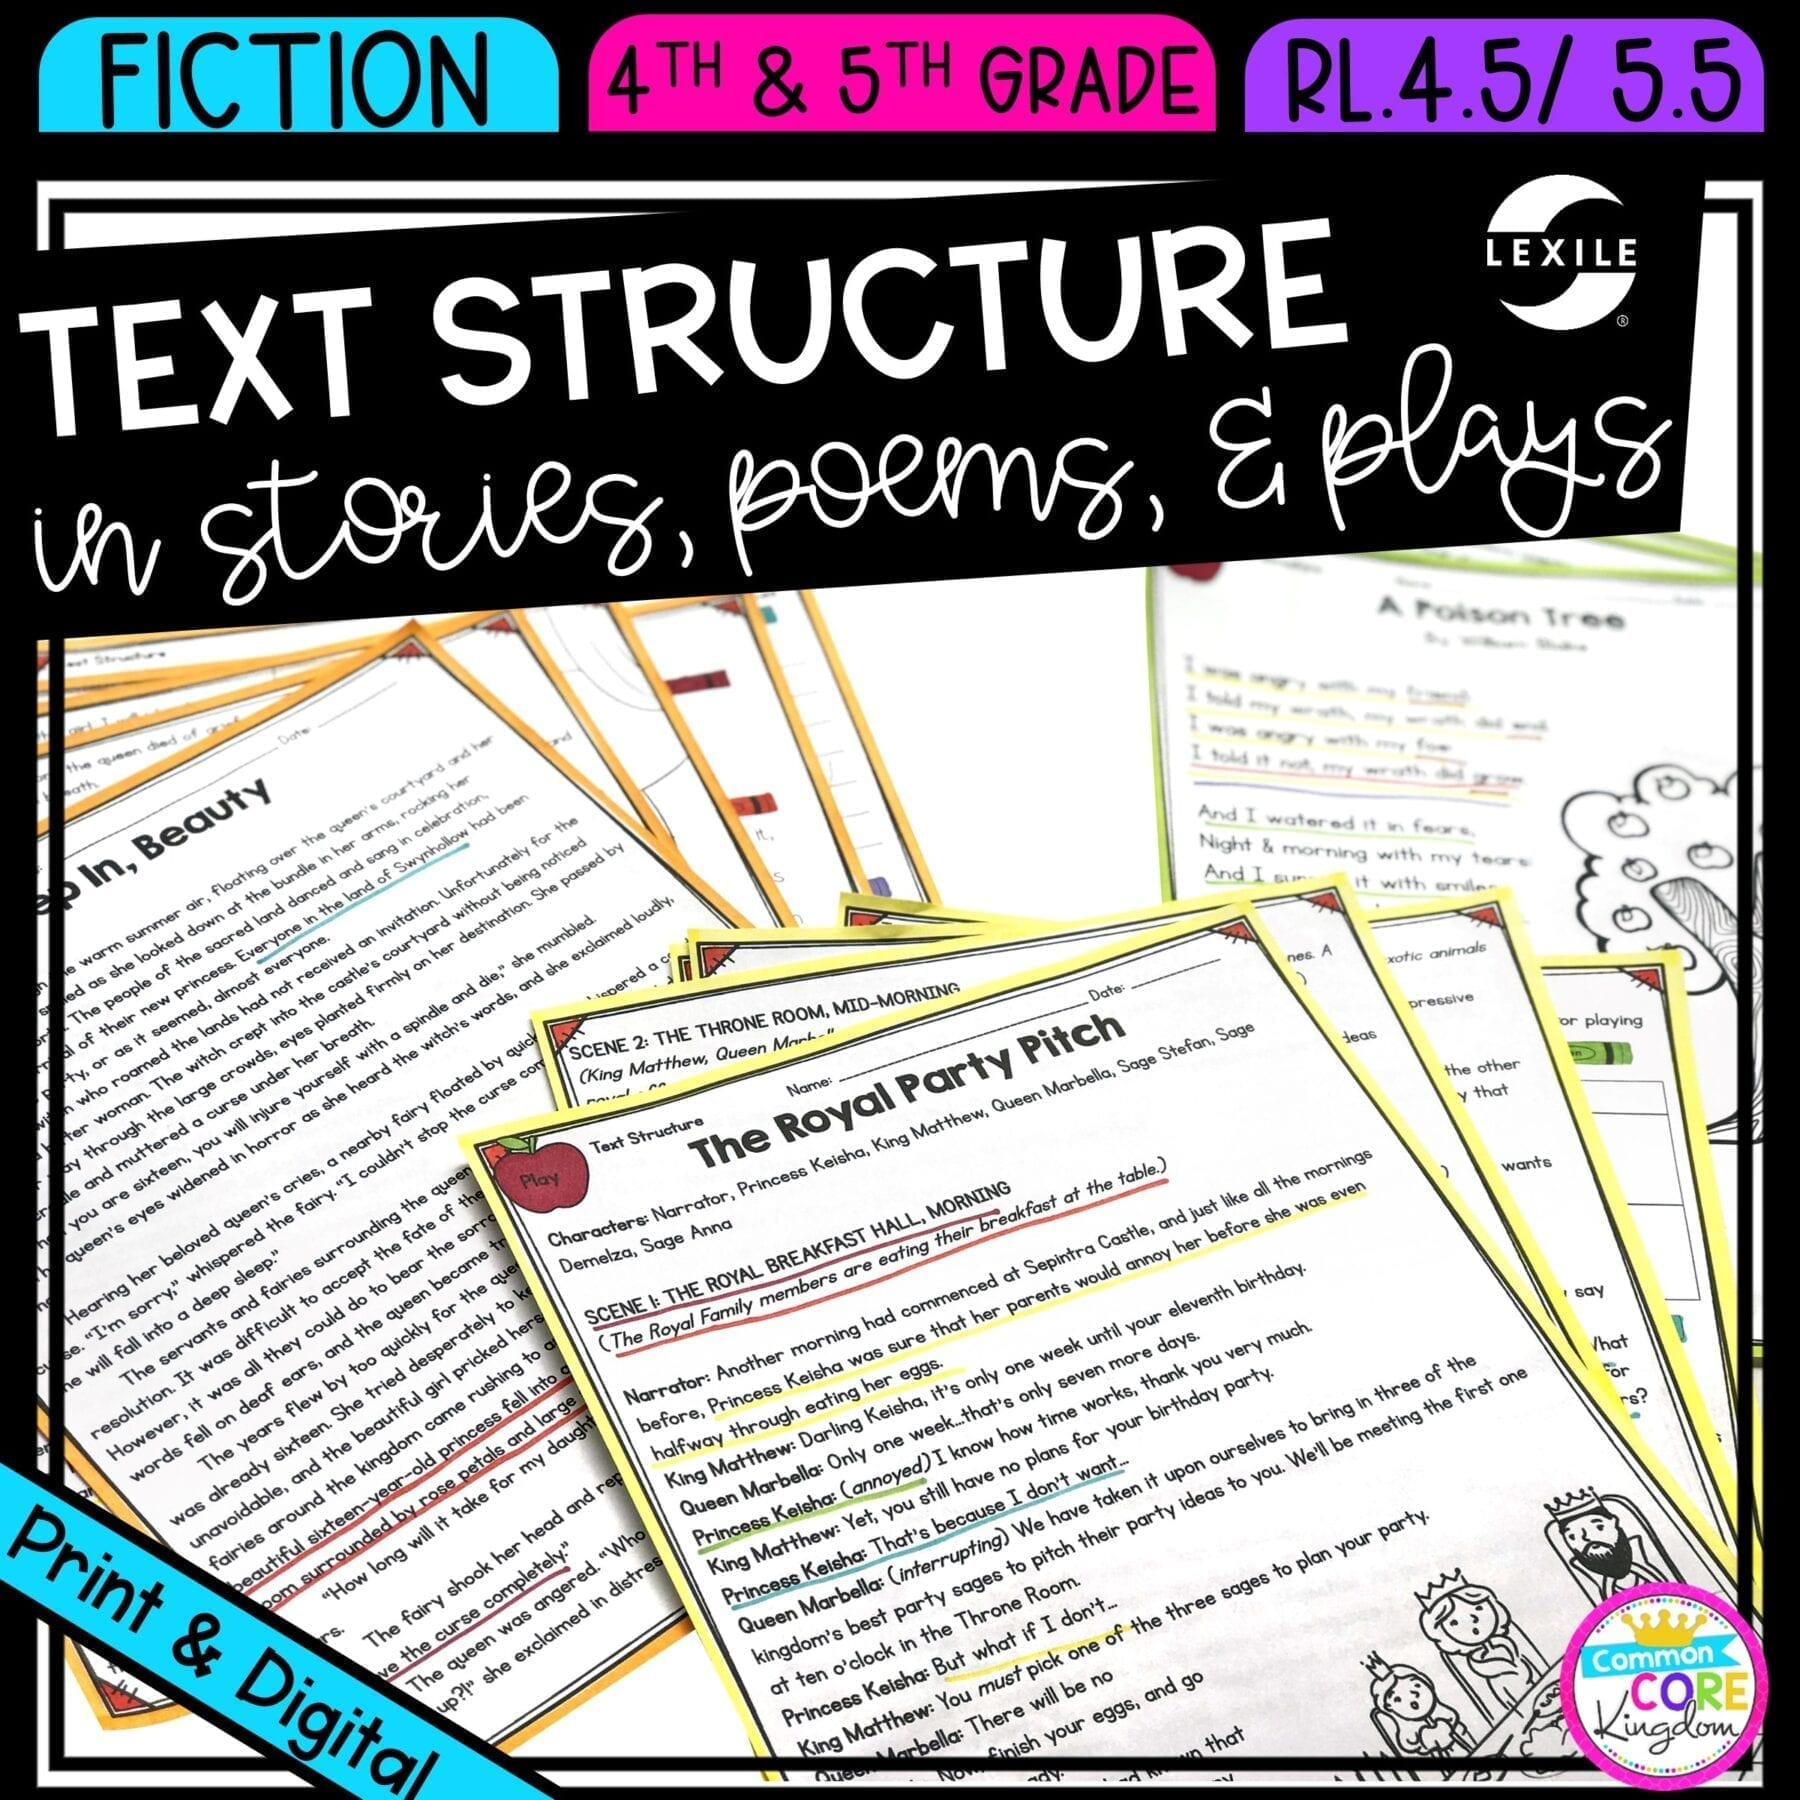 Text Structure in Stories, Poems and Plays for 4th & 5th grade cover showing printable and digital worksheets